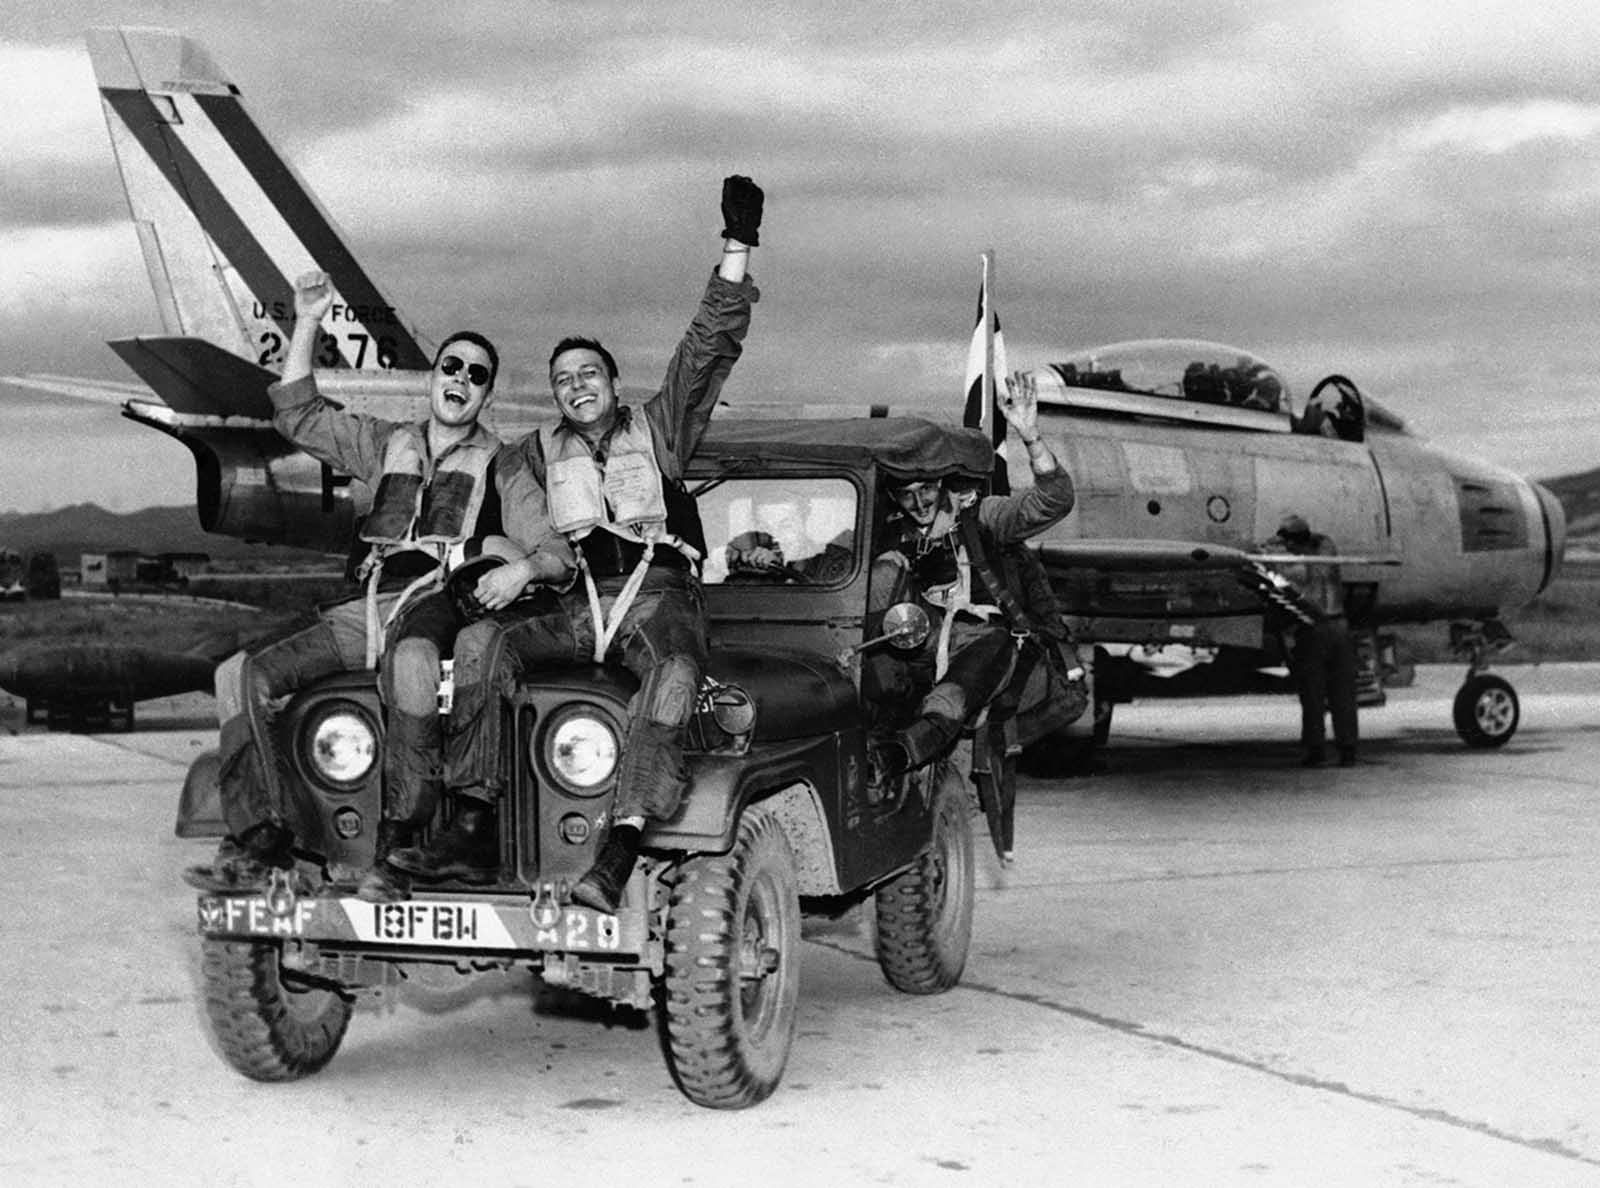 Three happy fliers of the 18th Fighter Bomber wing let the world know how they feels as they returned from a combat mission over North Korea to learn of the armistice signing on July 29, 1953. Left to right are: 2nd Lt. John Putty, Dallas, Tex.; 1st Lt. James A. Boucek, Ottawa, Kansas,: and 1st Lt. Richard D. Westcott, Houston, Tex., waving from the back seat of the jeep.